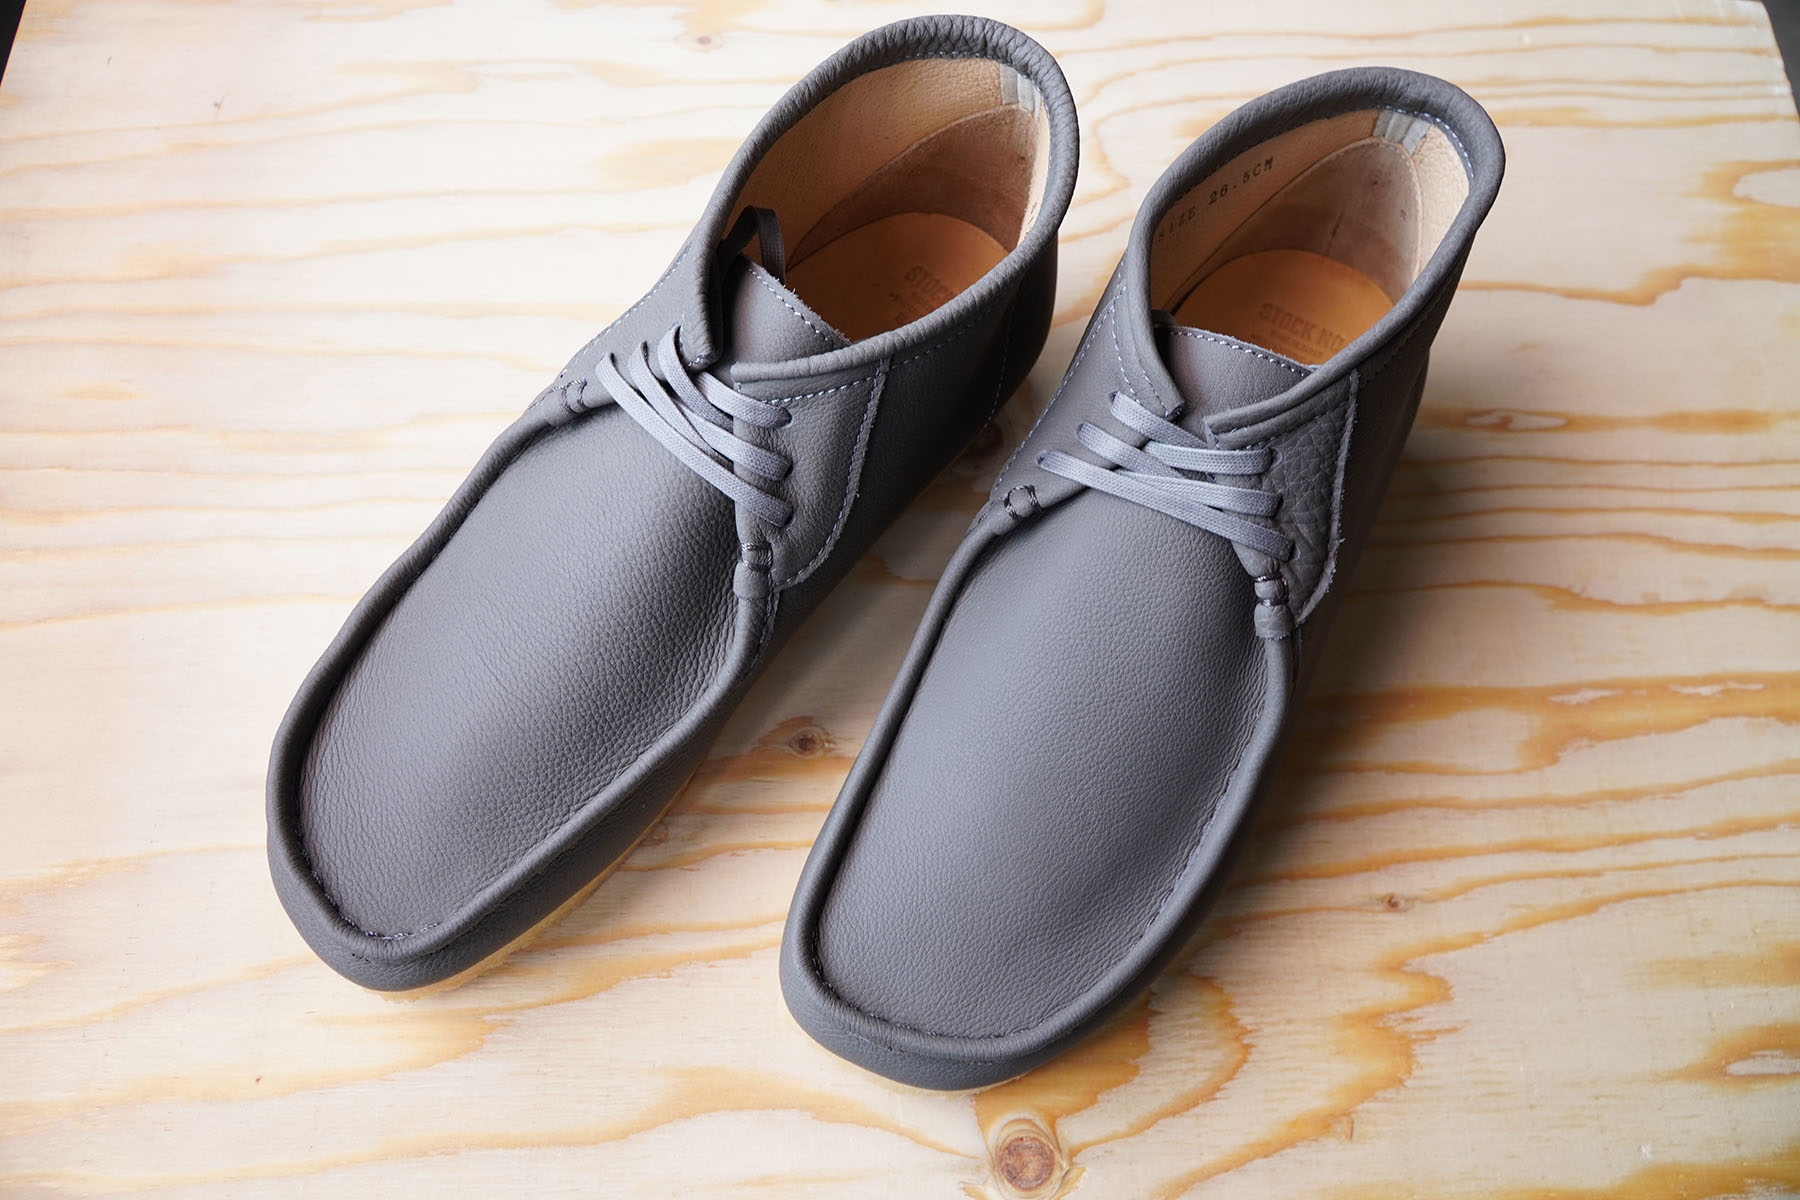 STOCK NO: -exclusive for ERA- MOCCASIN SHOES GRAY